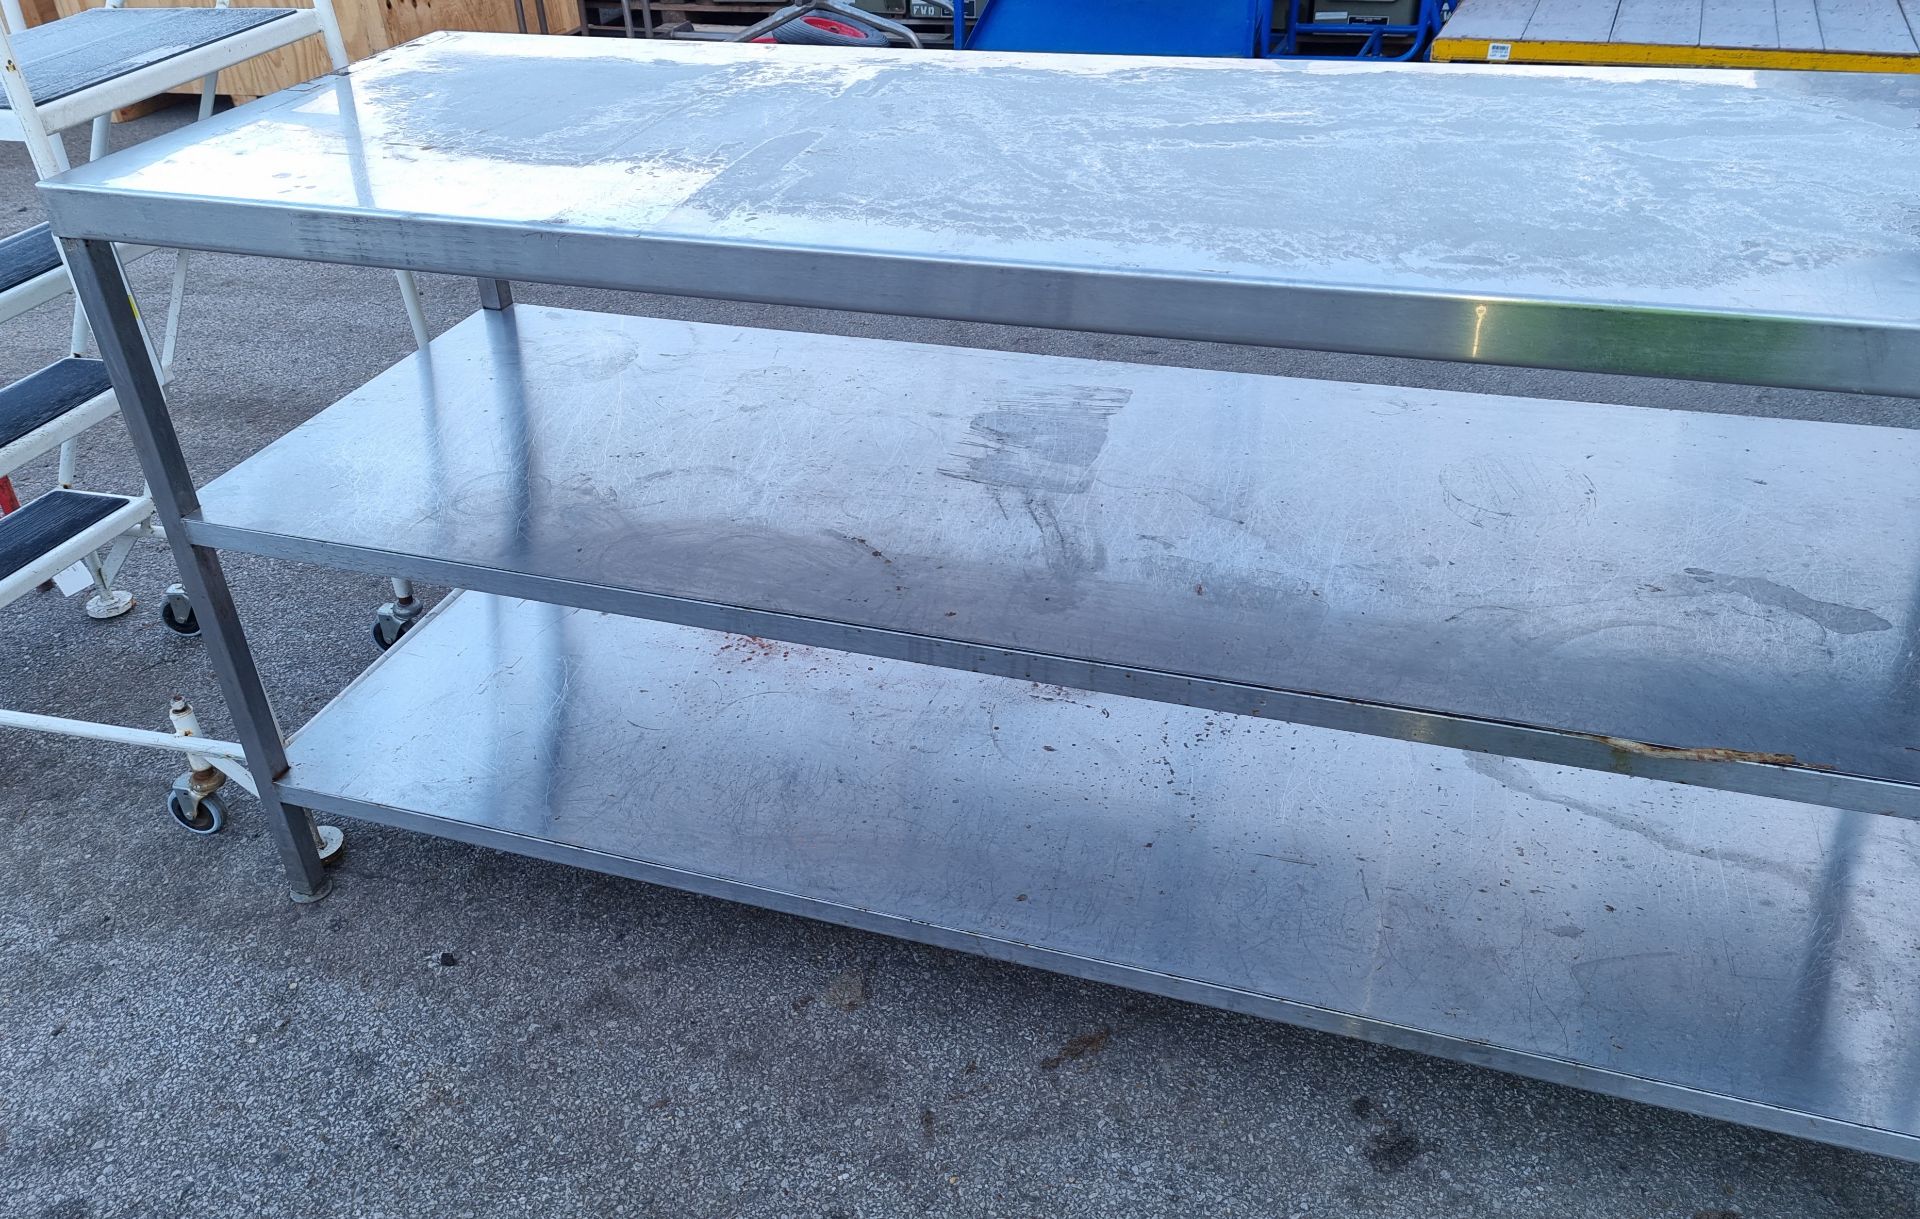 Stainless steel work table with 2 bottom shelves - dimensions: 180x65x90cm - Bild 3 aus 3